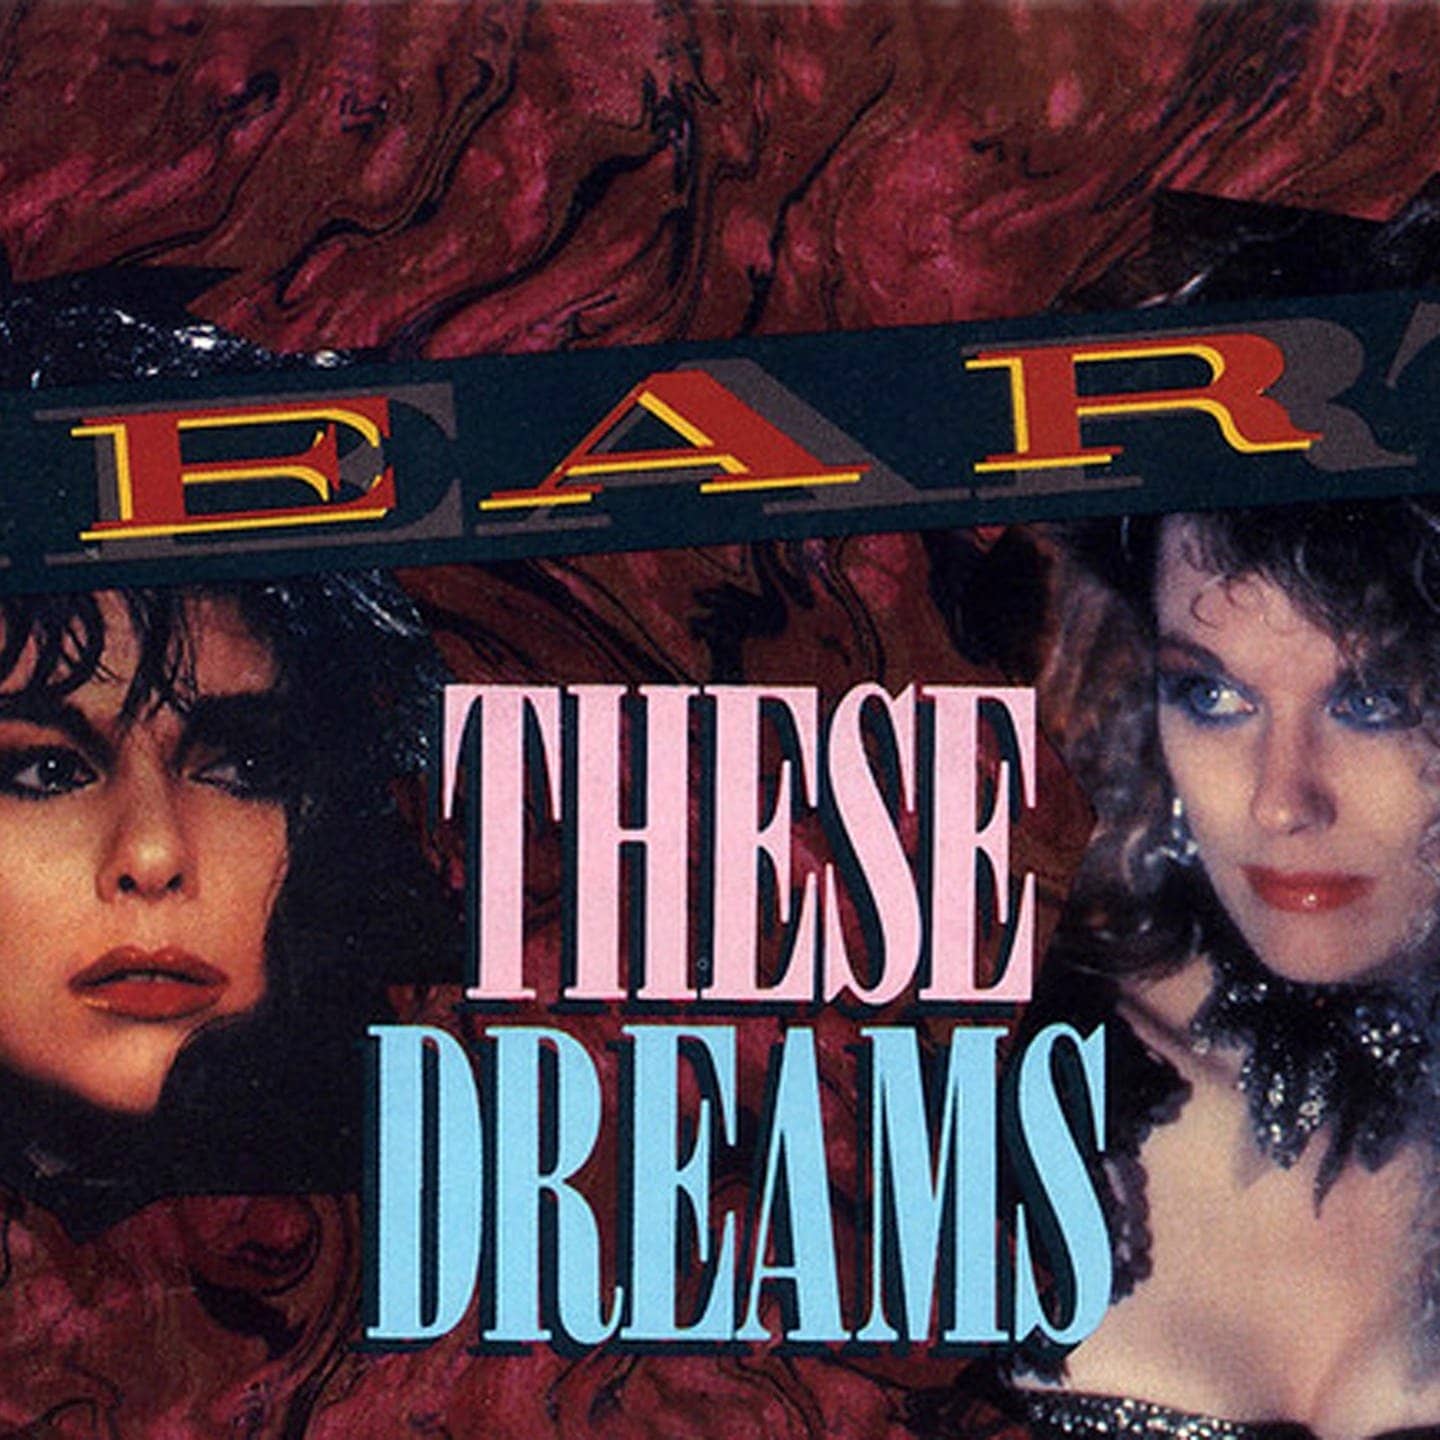 Heart – These Dreams (Foto: Capitol Records)